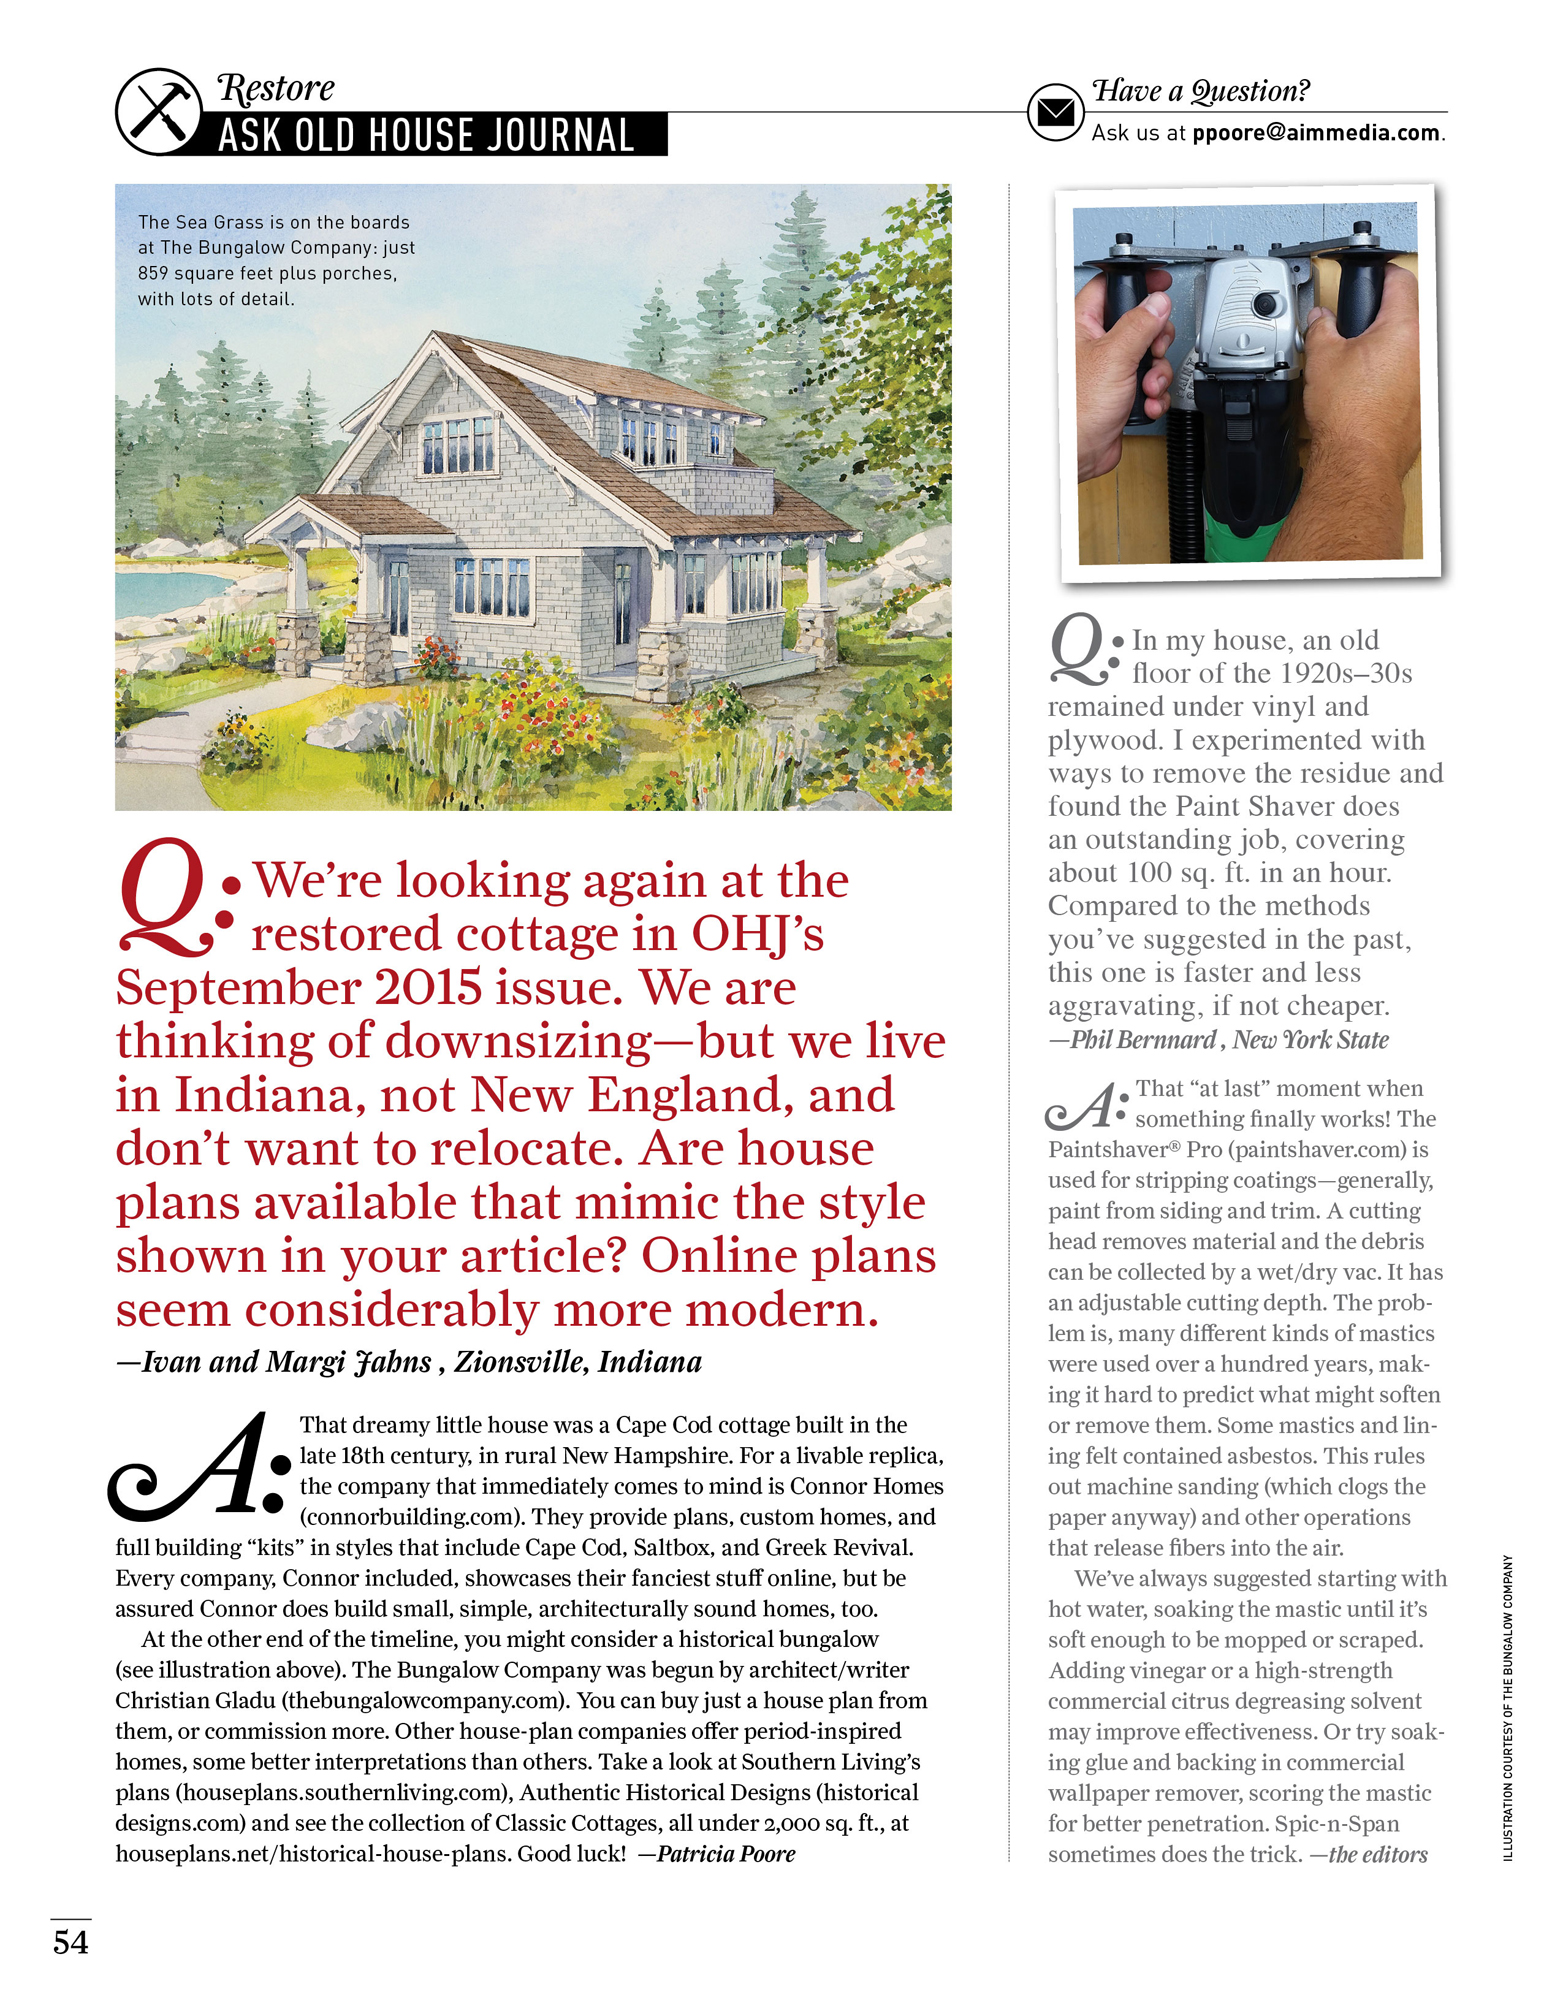 Ask Old House Journal by Megan Hillman